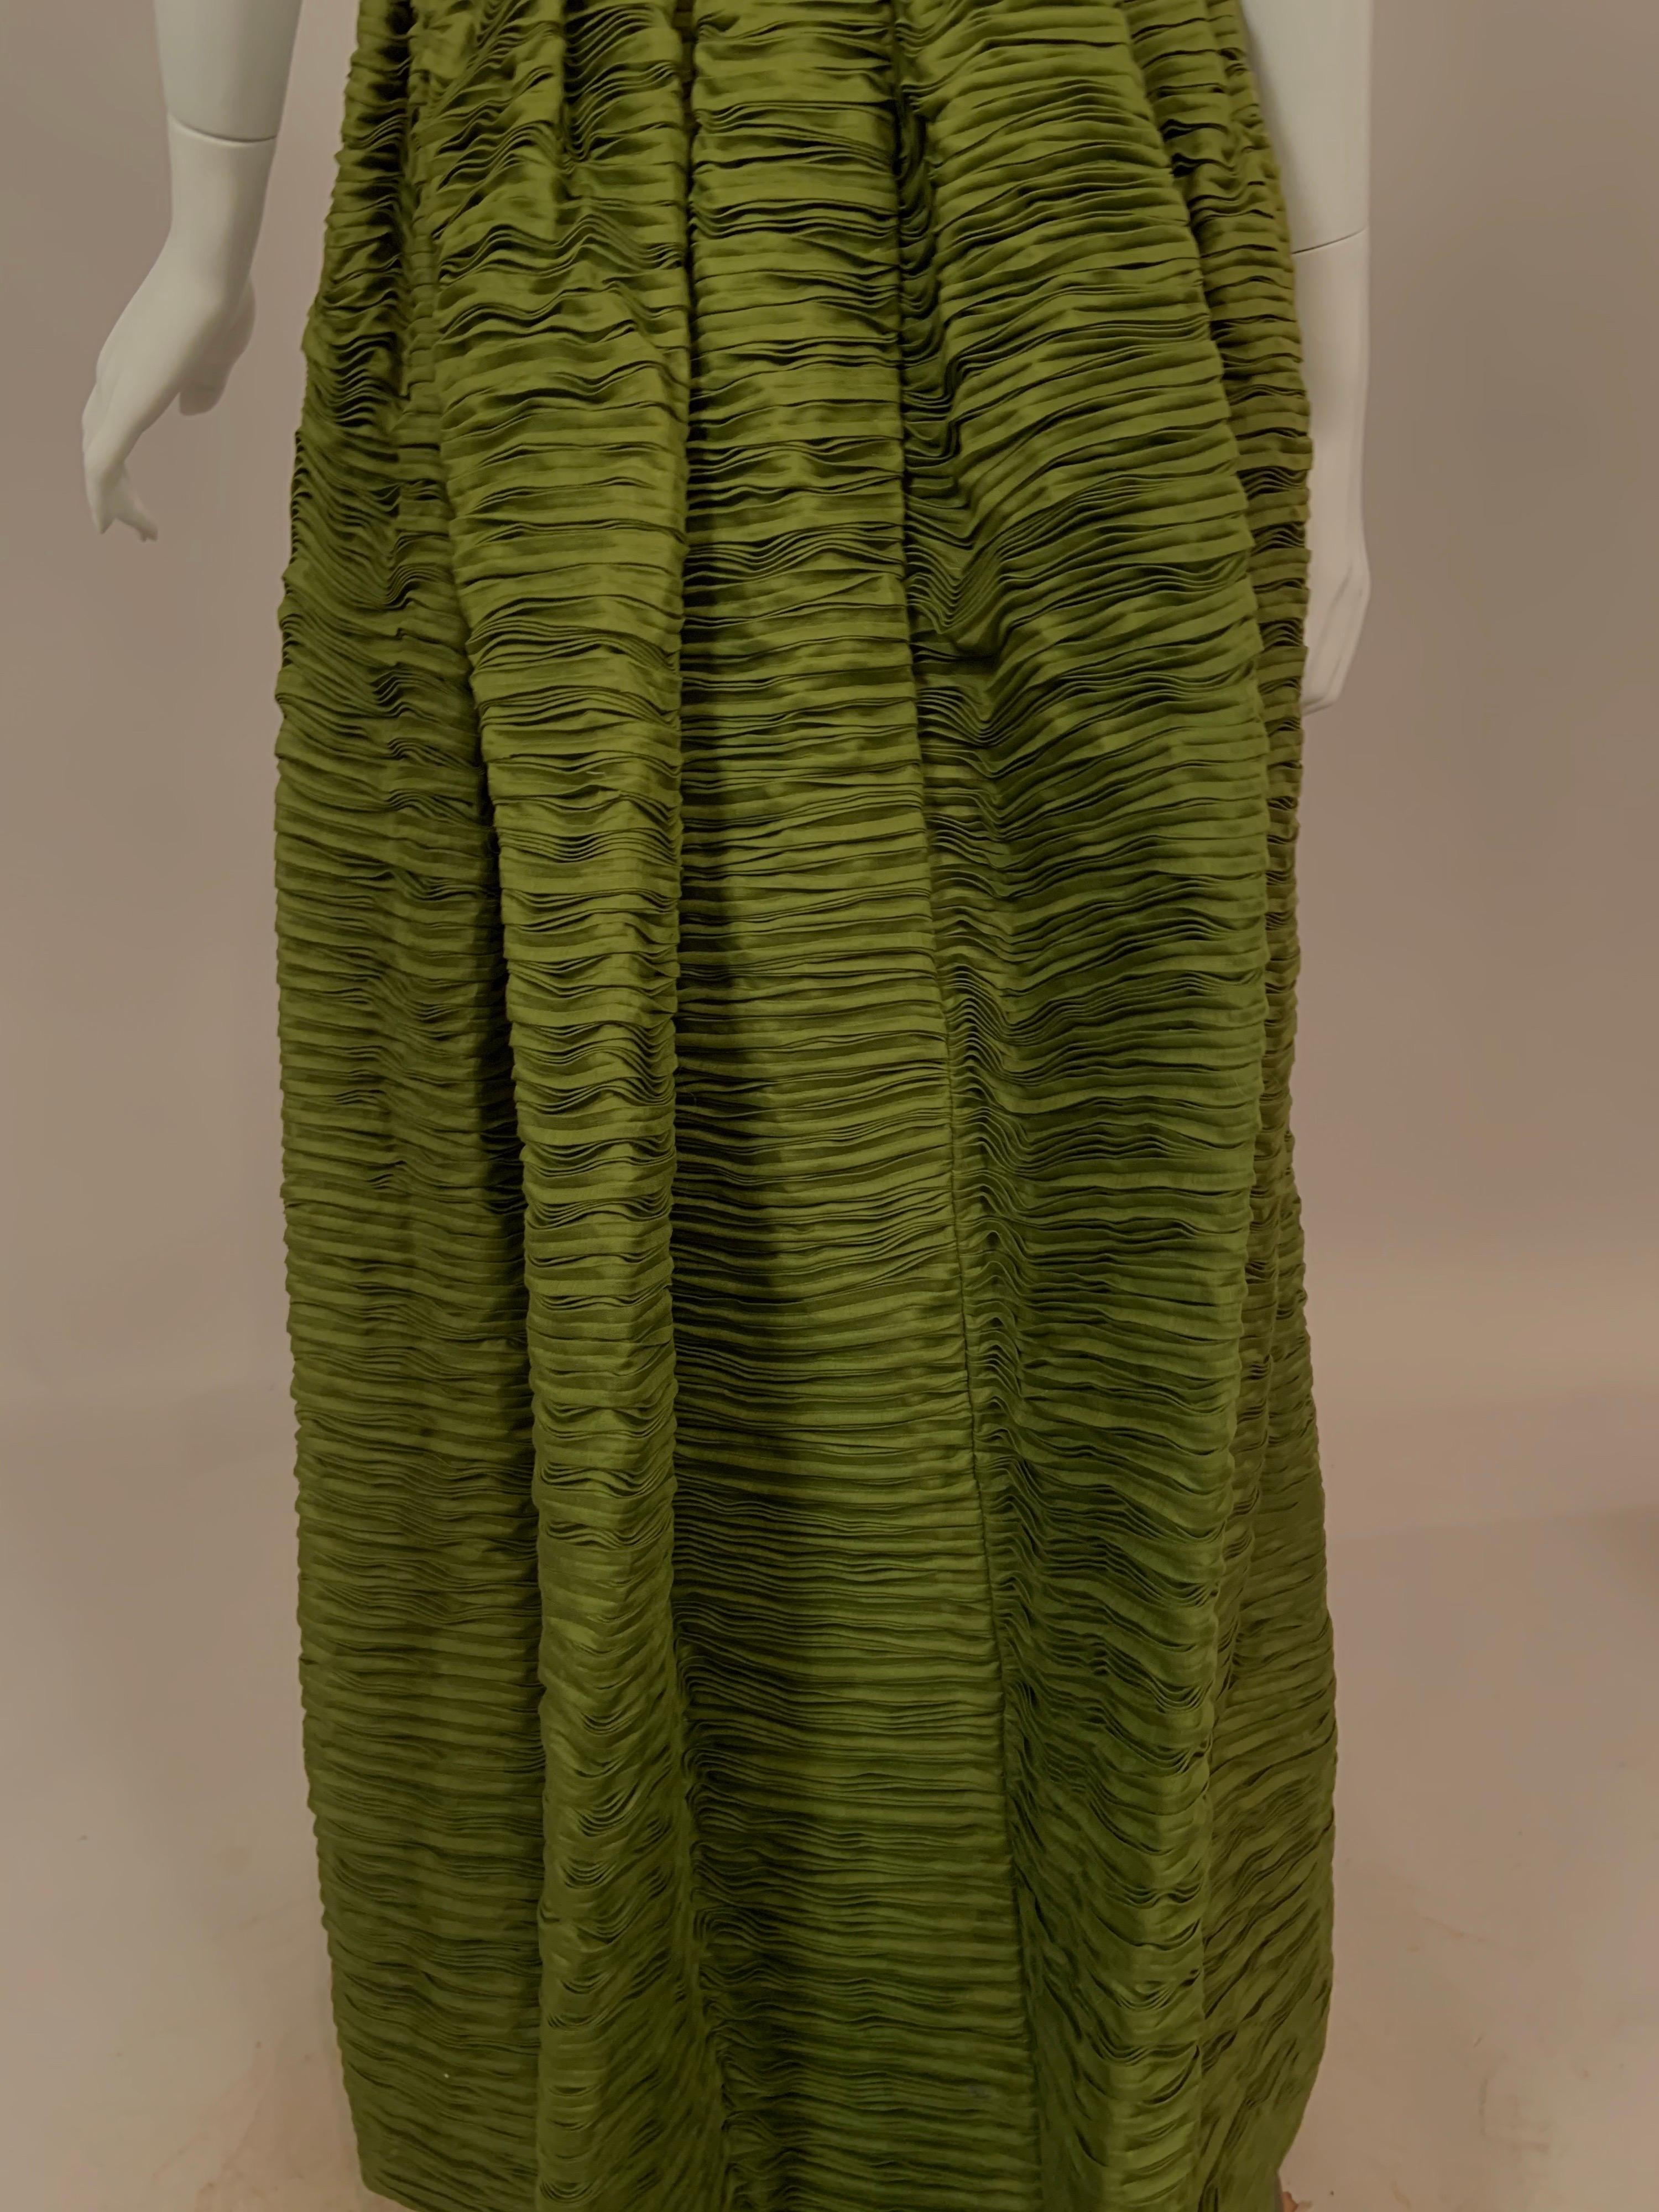 Sybil Connolly Haute Couture Olive Green Hand Pleated Linen Evening Skirt  In Excellent Condition For Sale In New Hope, PA